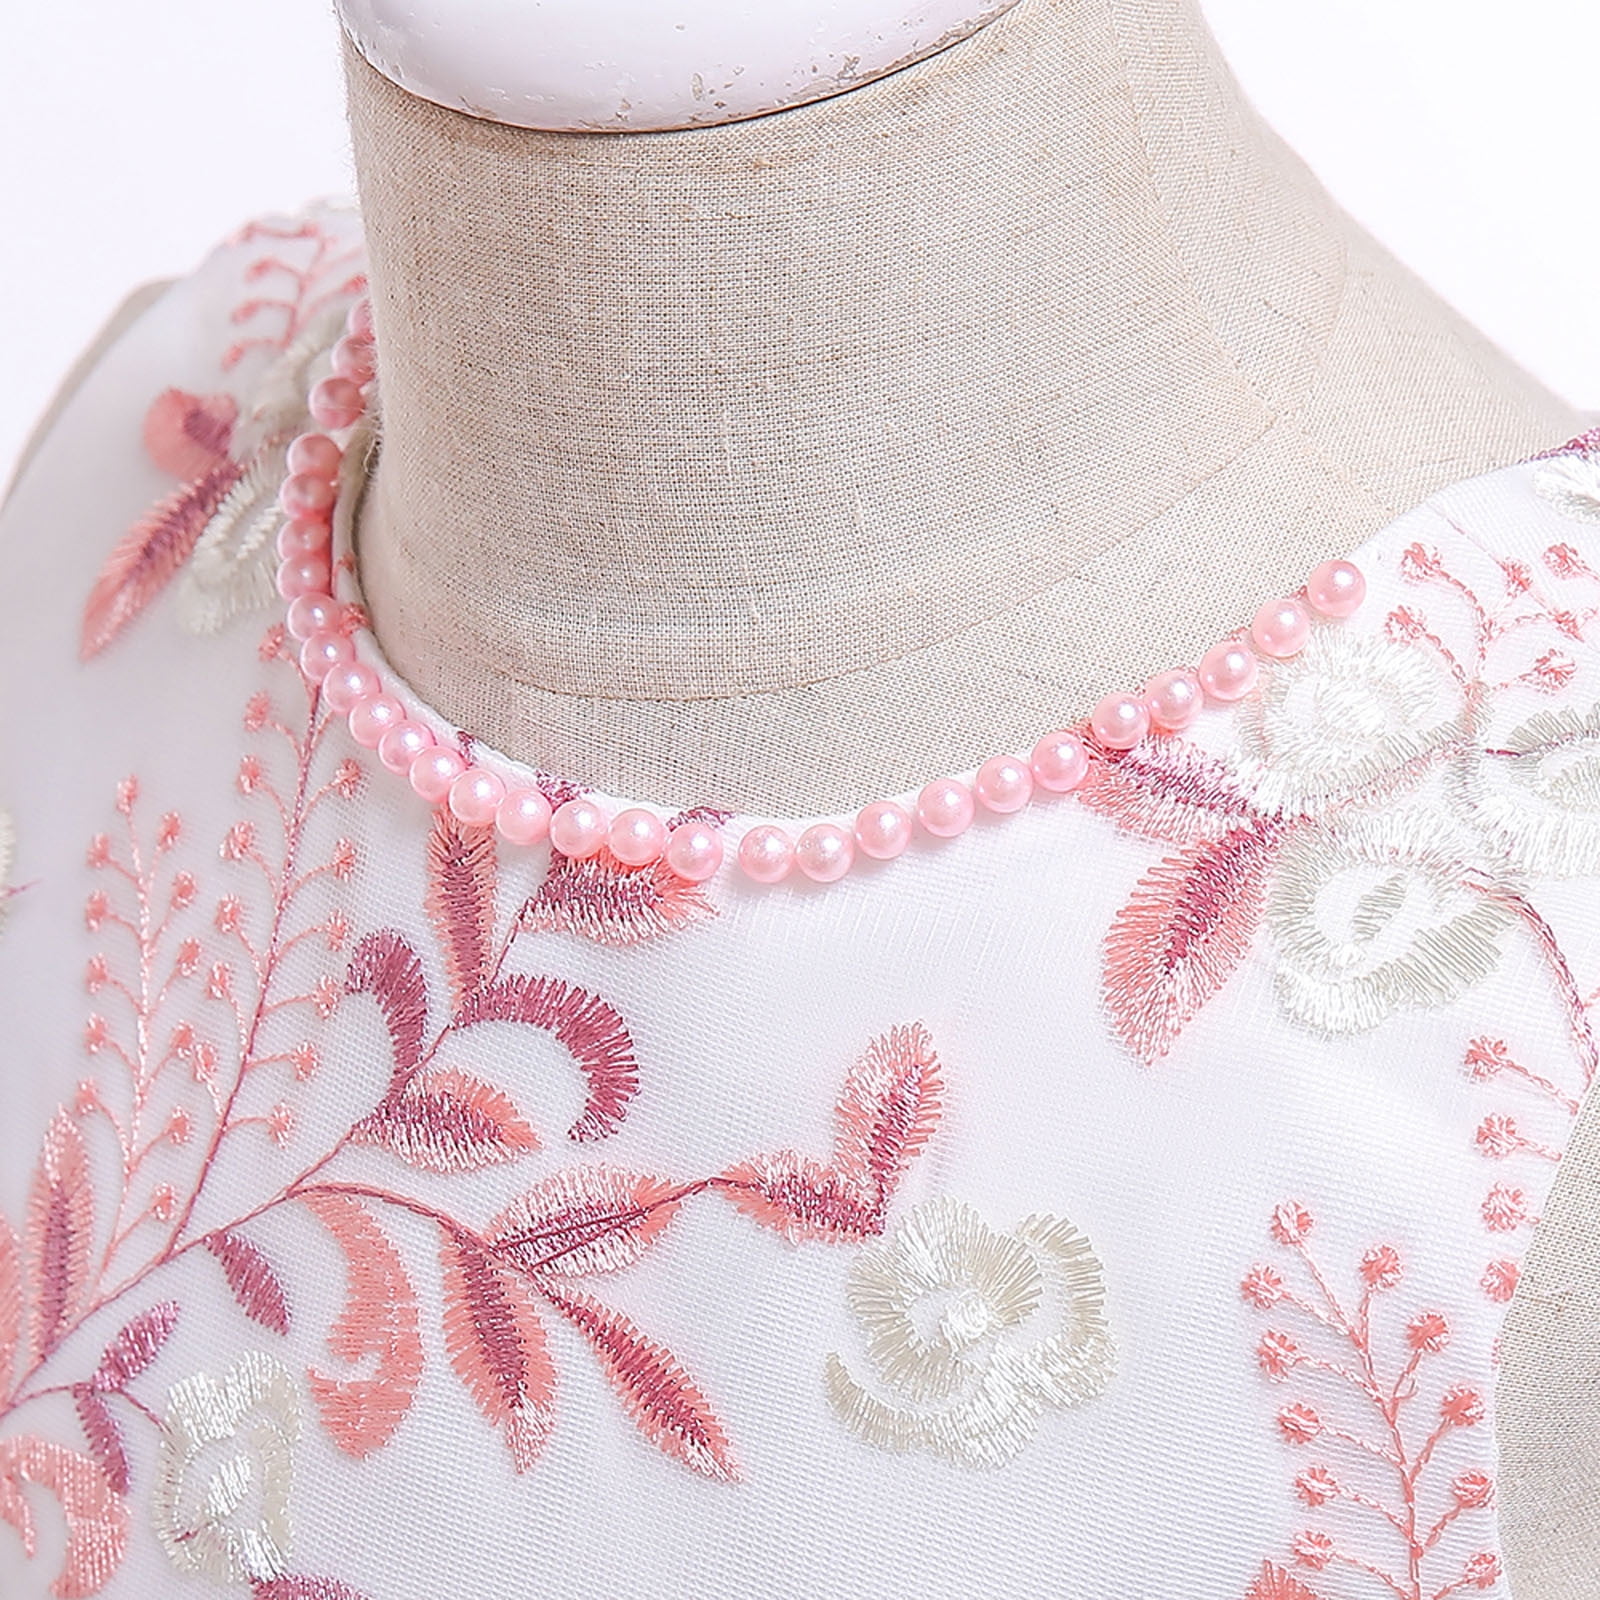 Heirloom Embroidery by Machine: Different Types - Sew Daily